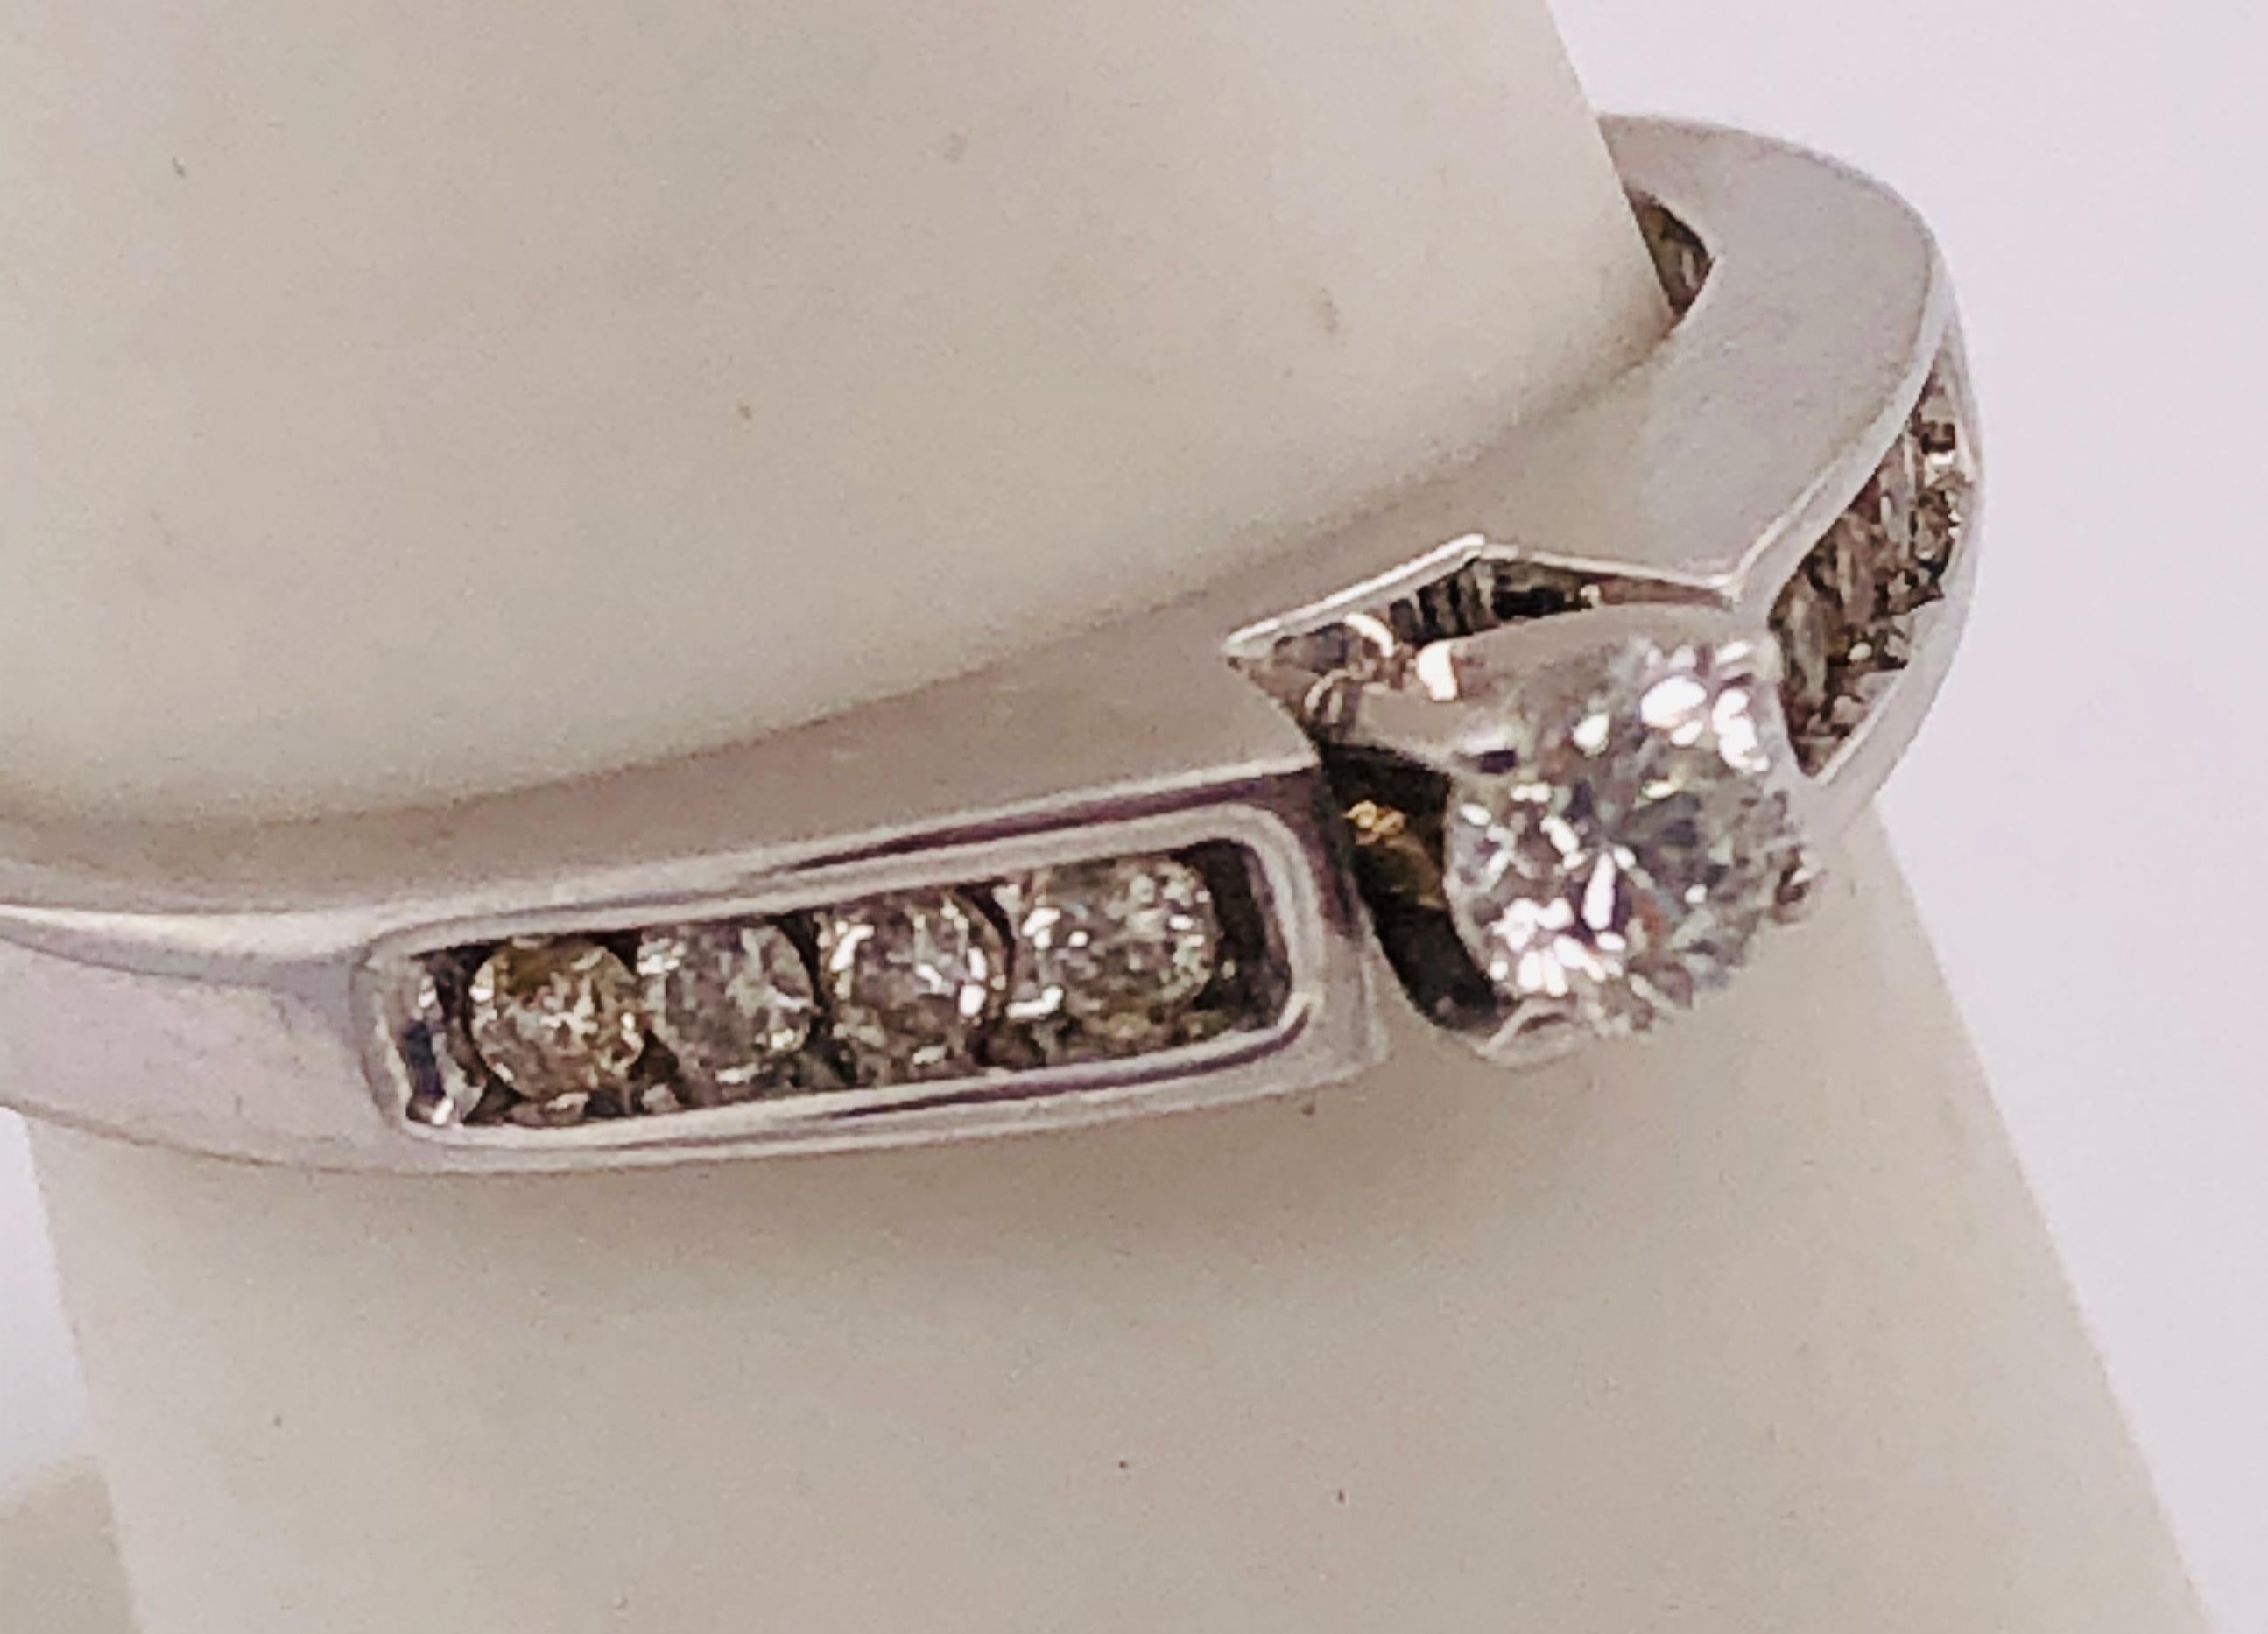 14Kt White Gold Engagement Ring with Diamond 0.31 Total Diamond Weight
Size 6.75 with 3.31 grams total weight
